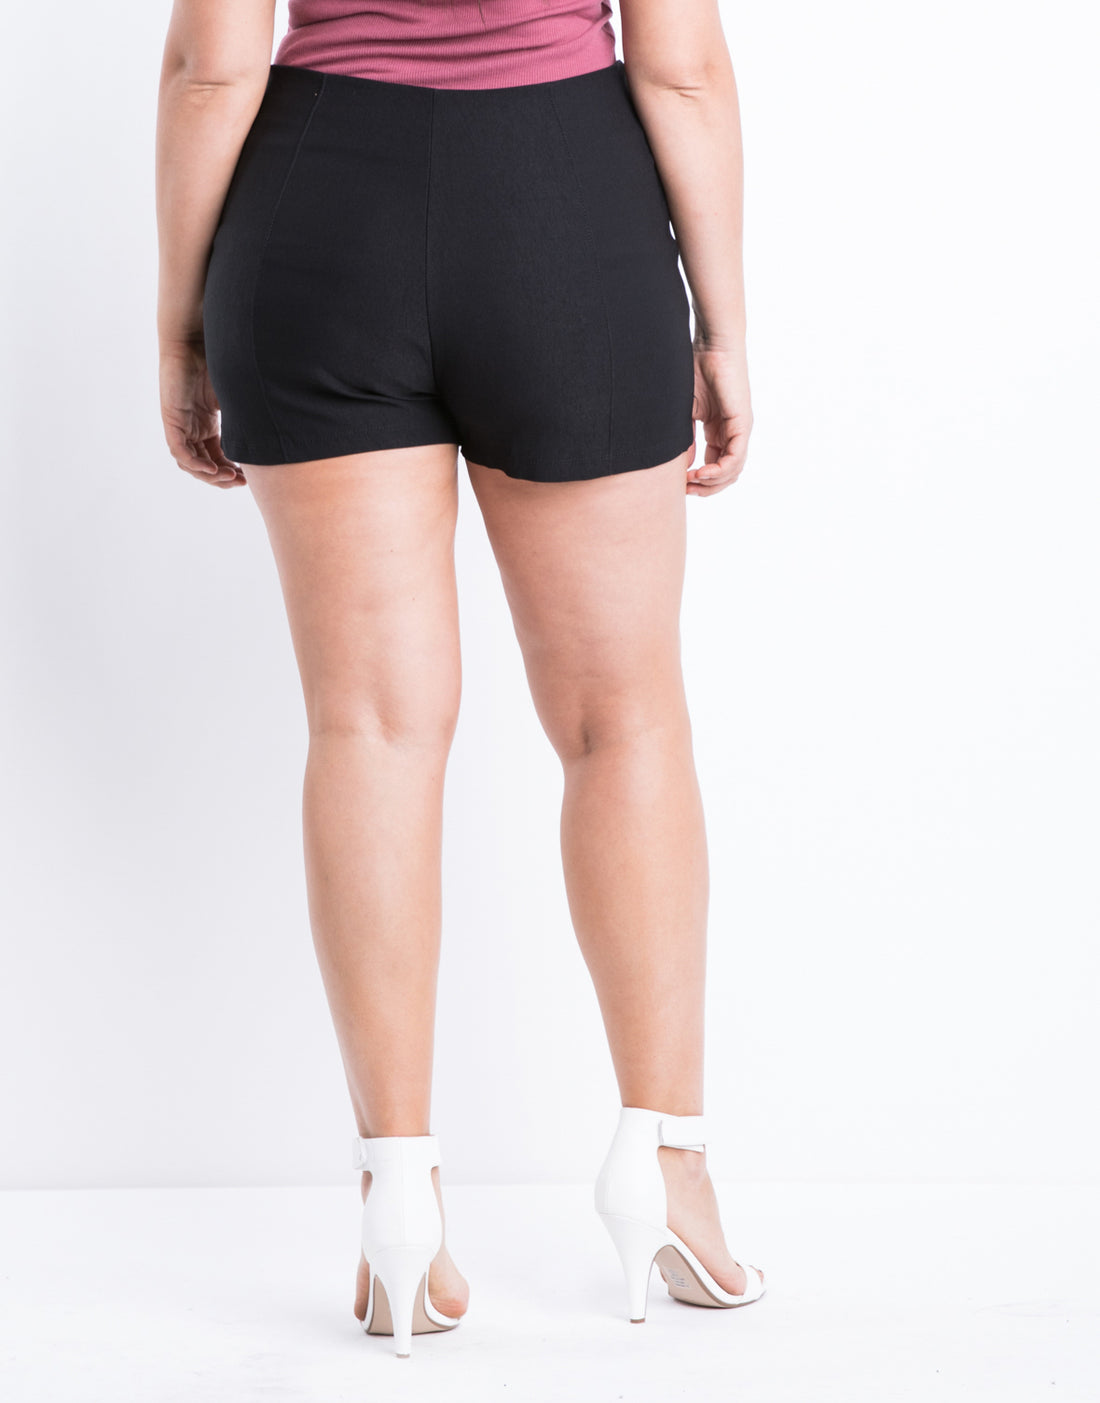 Curve Date Night Shorts Plus Size Bottoms -2020AVE